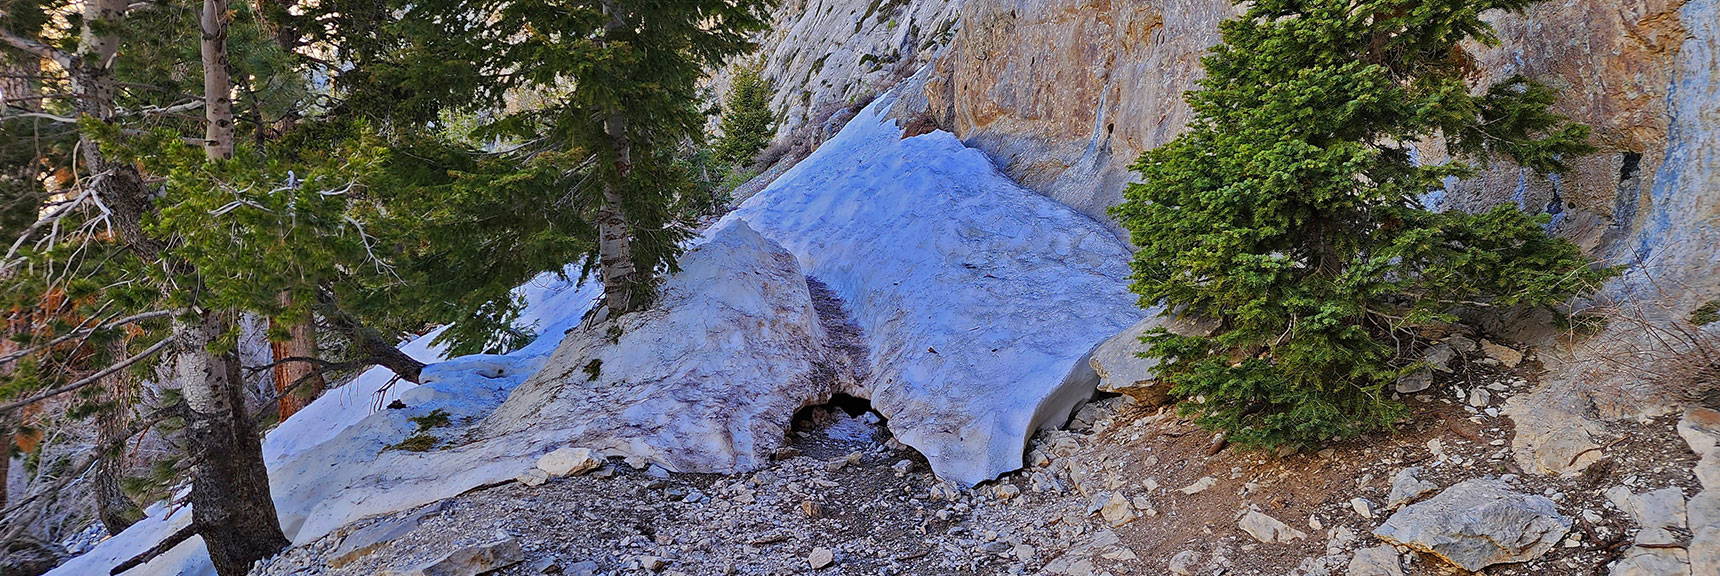 Snowdrifts Remain on Trail This Early May Day | Mary Jane Falls | Mt. Charleston Wilderness | Spring Mountains, Nevada